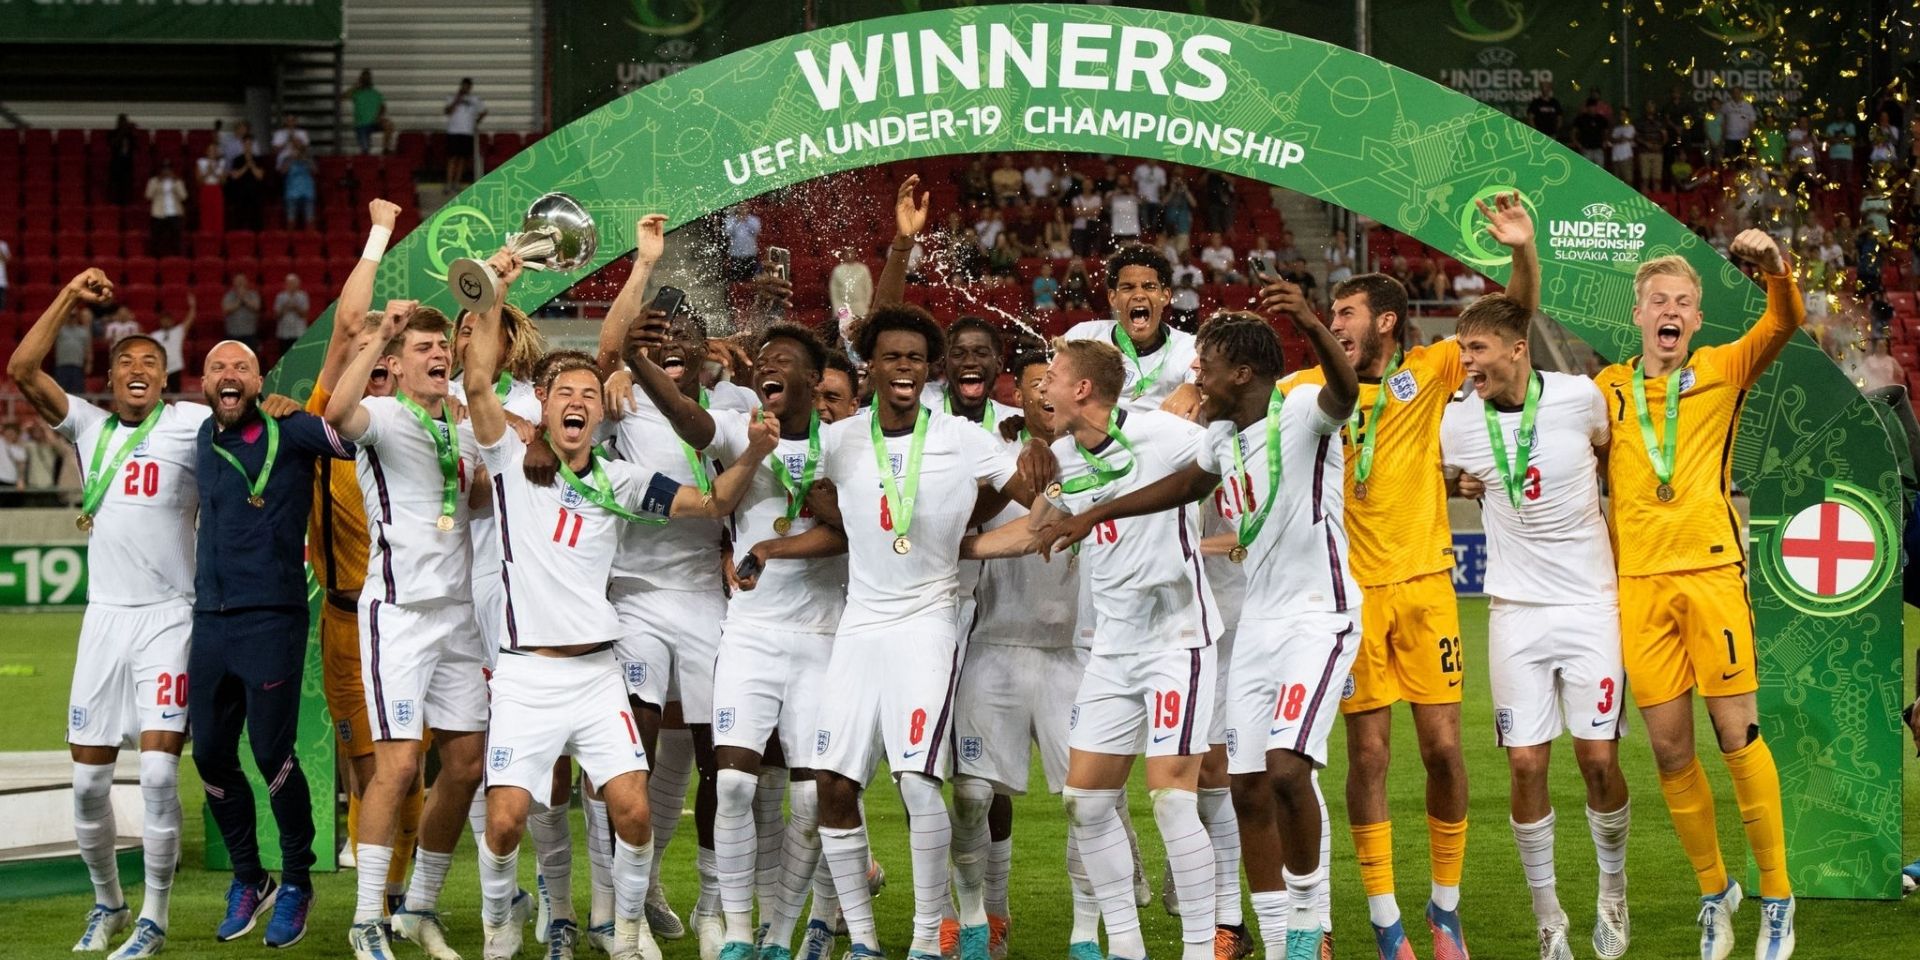 Two Young Liverpool players on their experience of winning the U19 Euros with England this summer